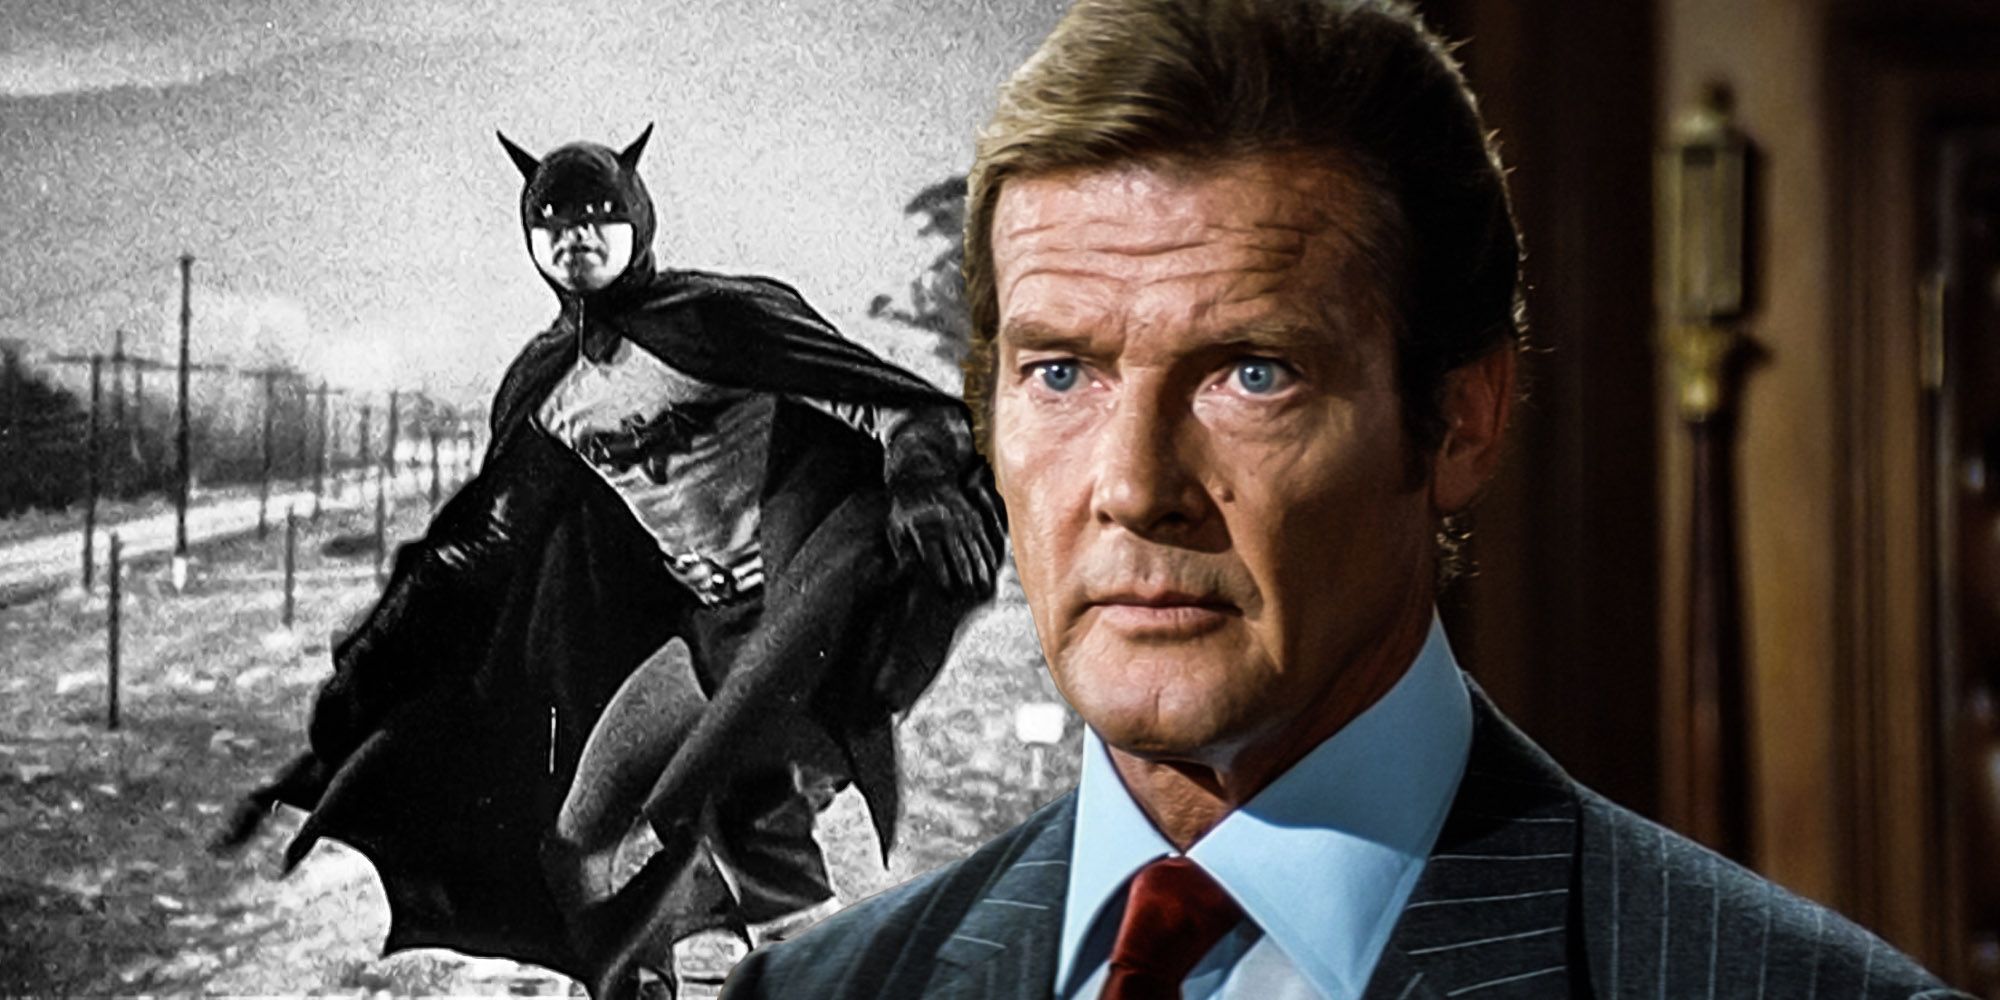 The First Actor To Play Batman Onscreen (& His Bond Connection)